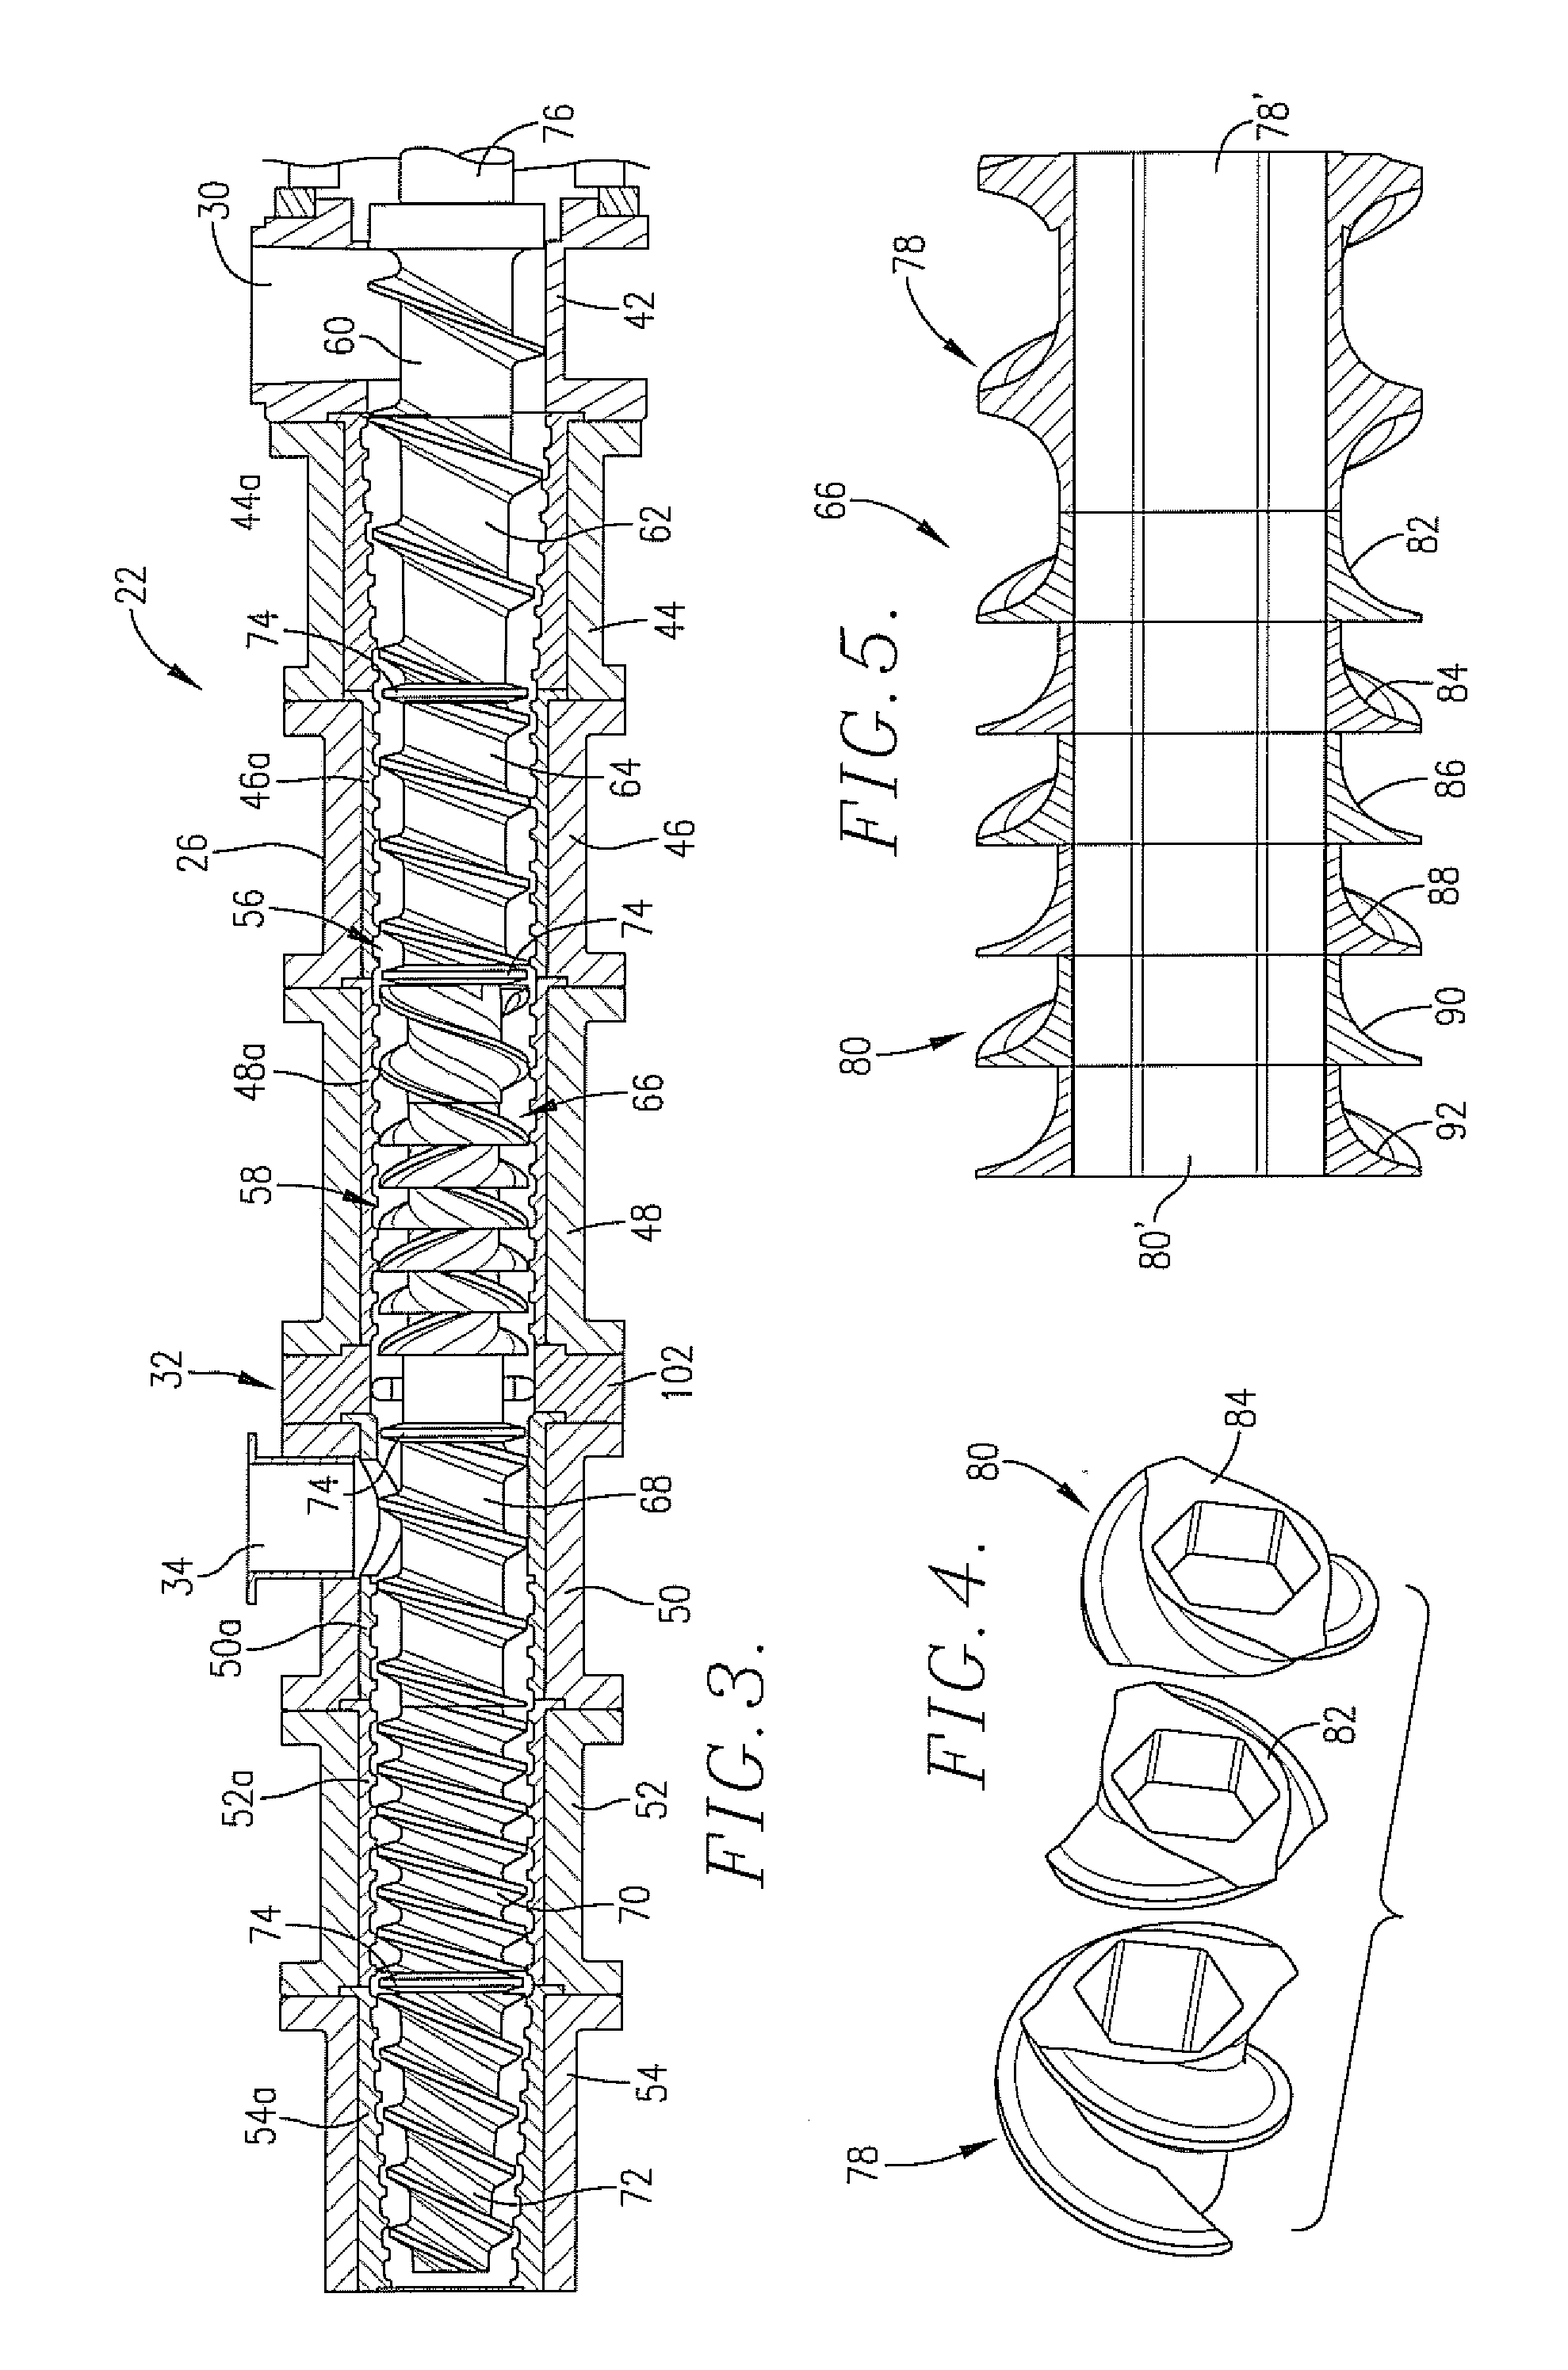 Extruder having variable mid-barrel restriction and adjacent high intensity mixing assembly